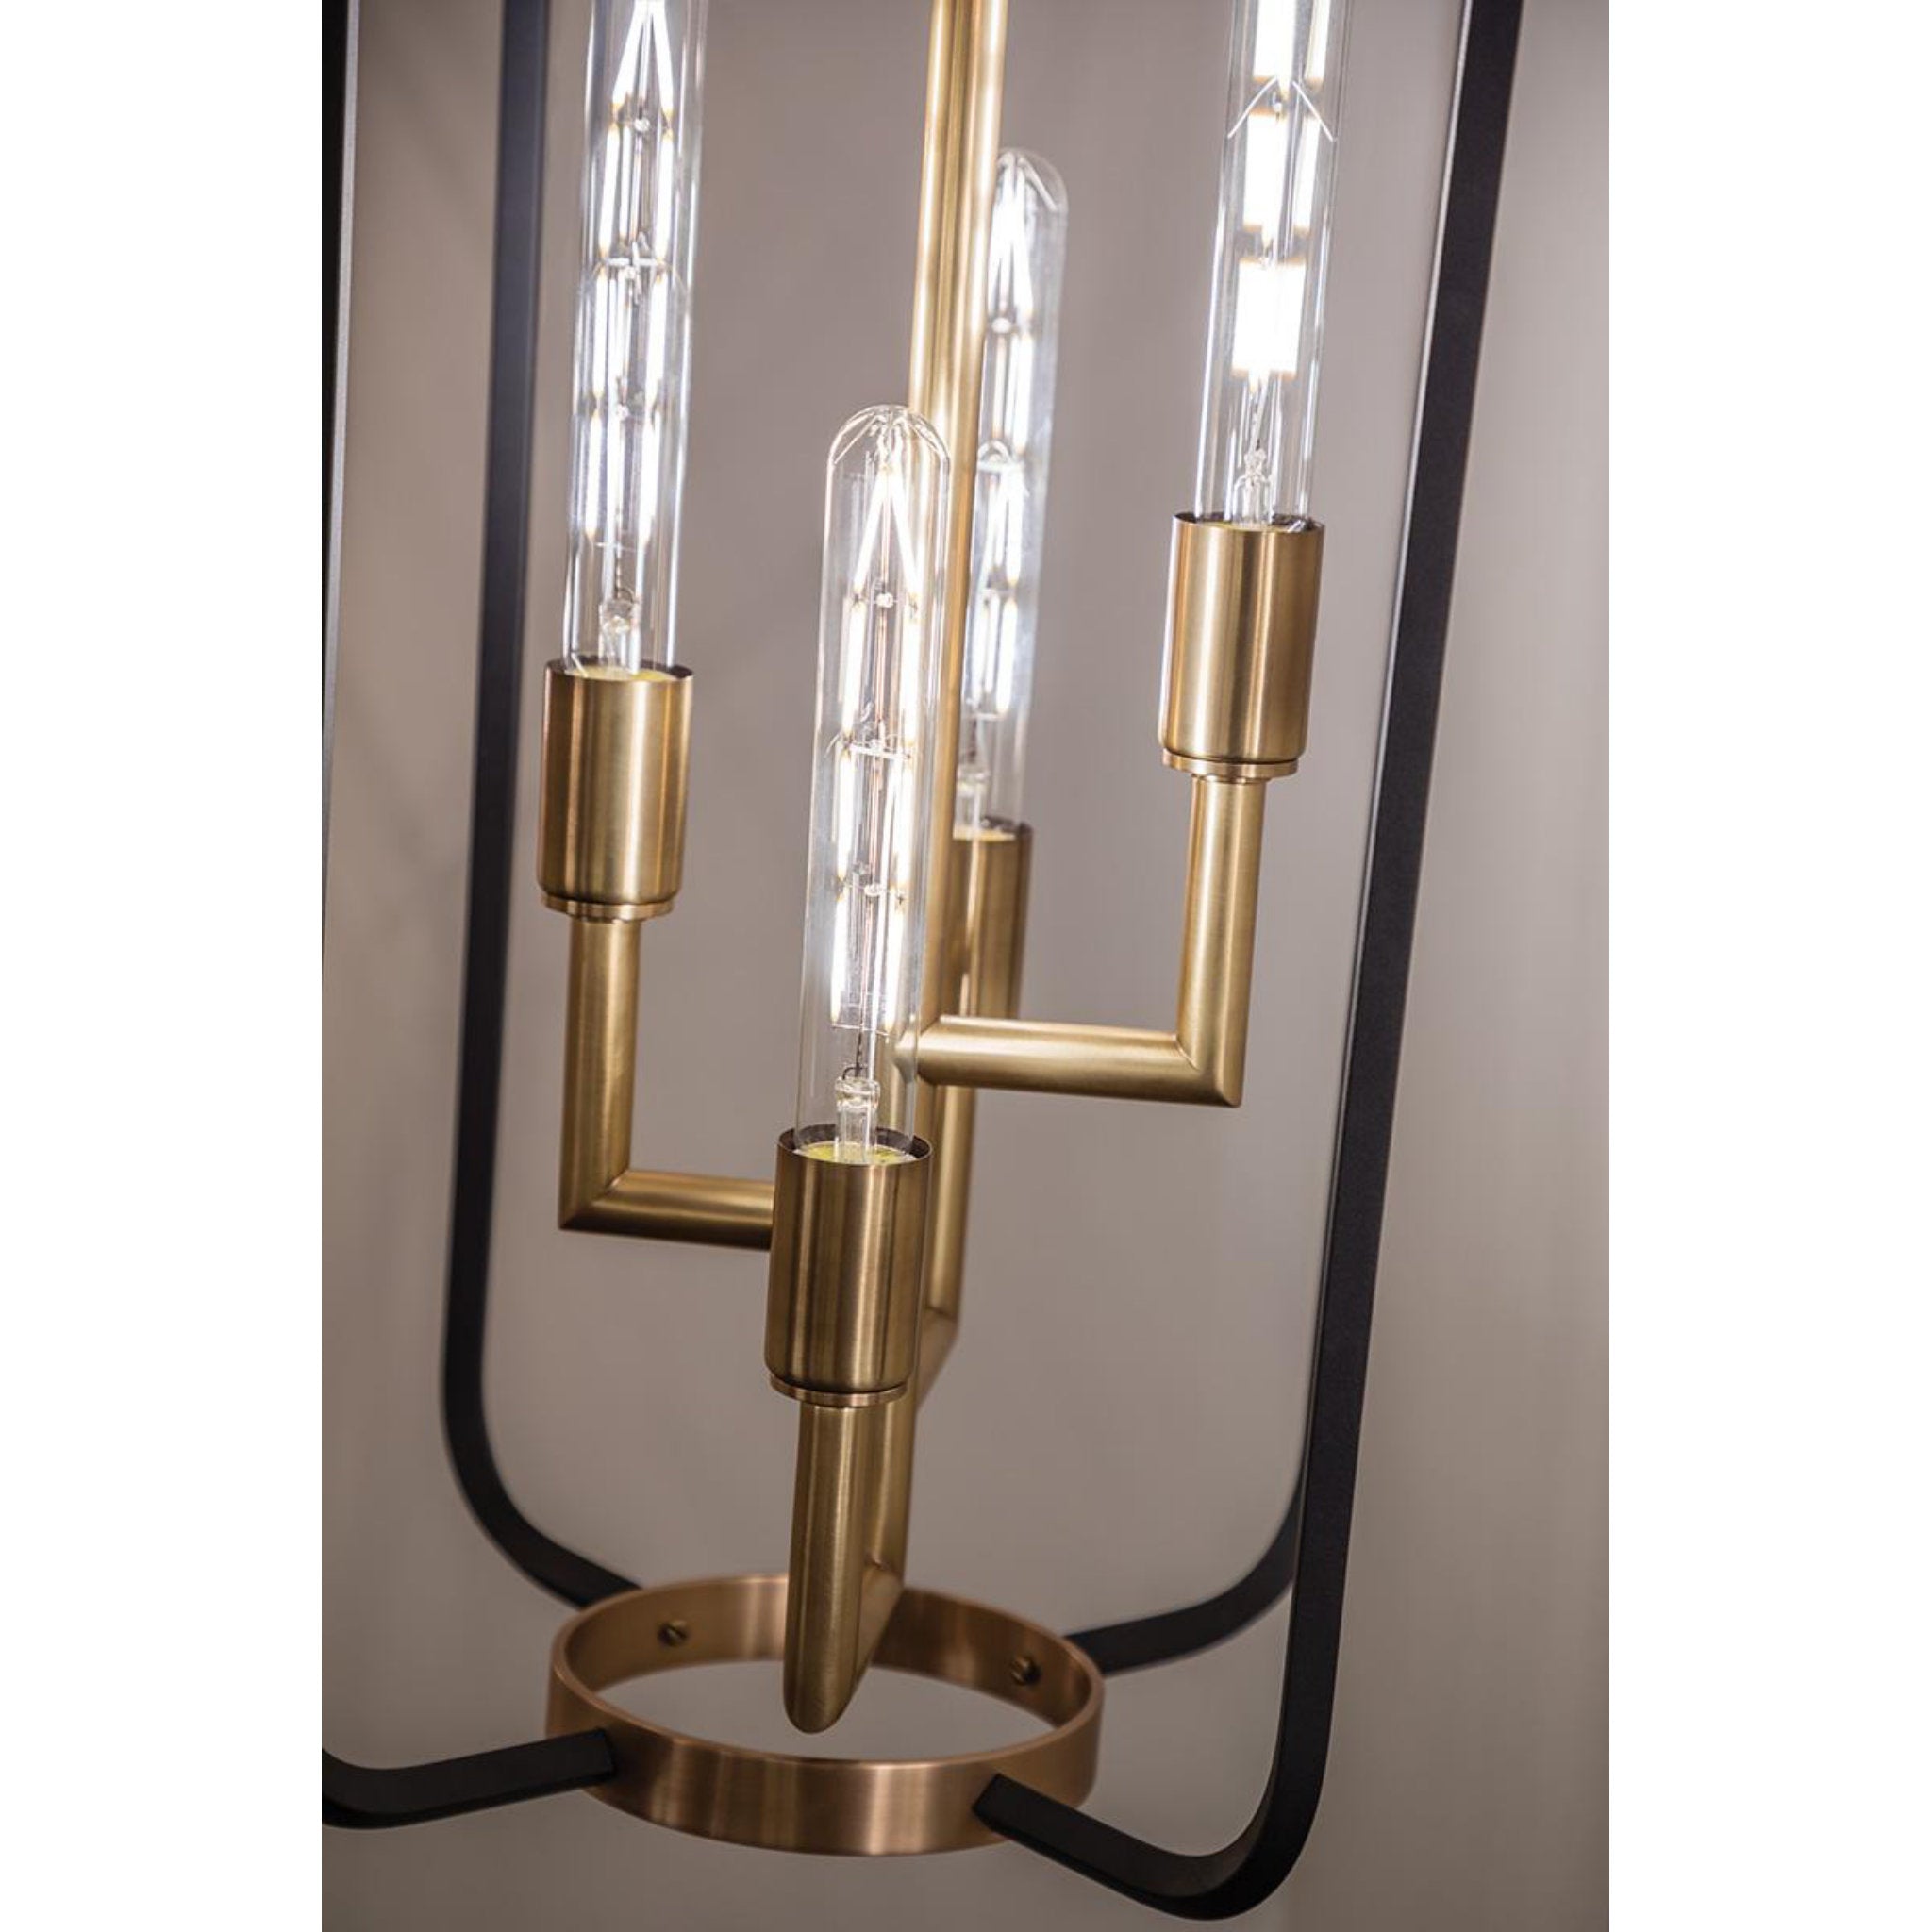 Angler 3 Light Wall Sconce in Aged Brass